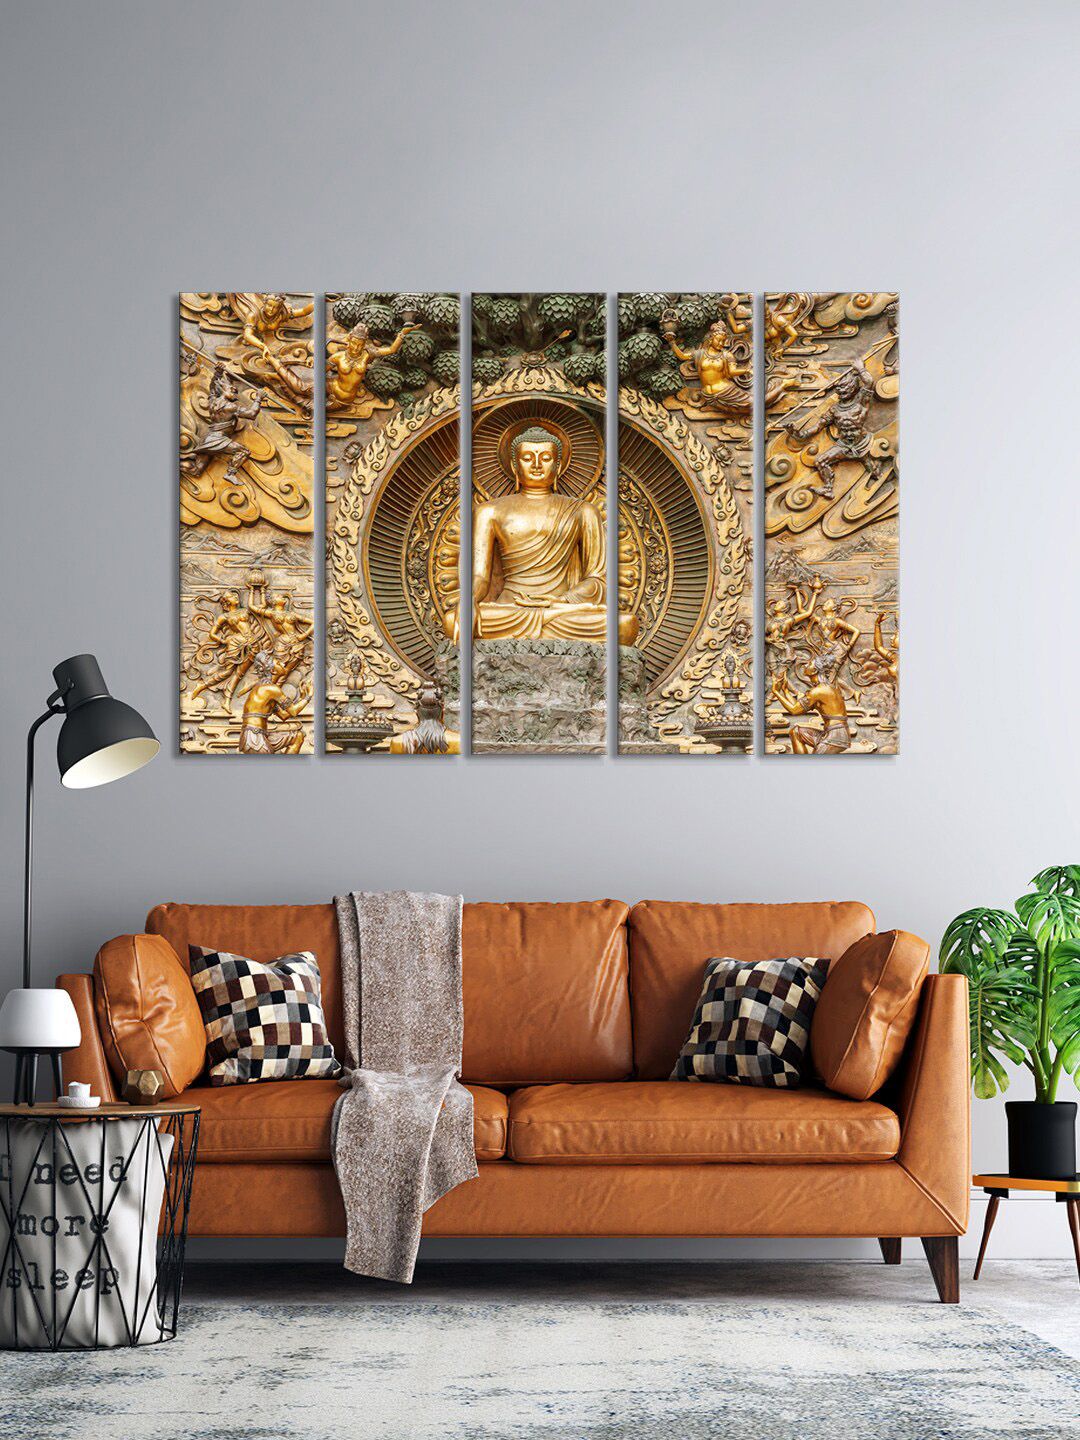 999Store Set Of 5 Gold-Toned & Grey Bed Buddha Wall Art Frames Price in India